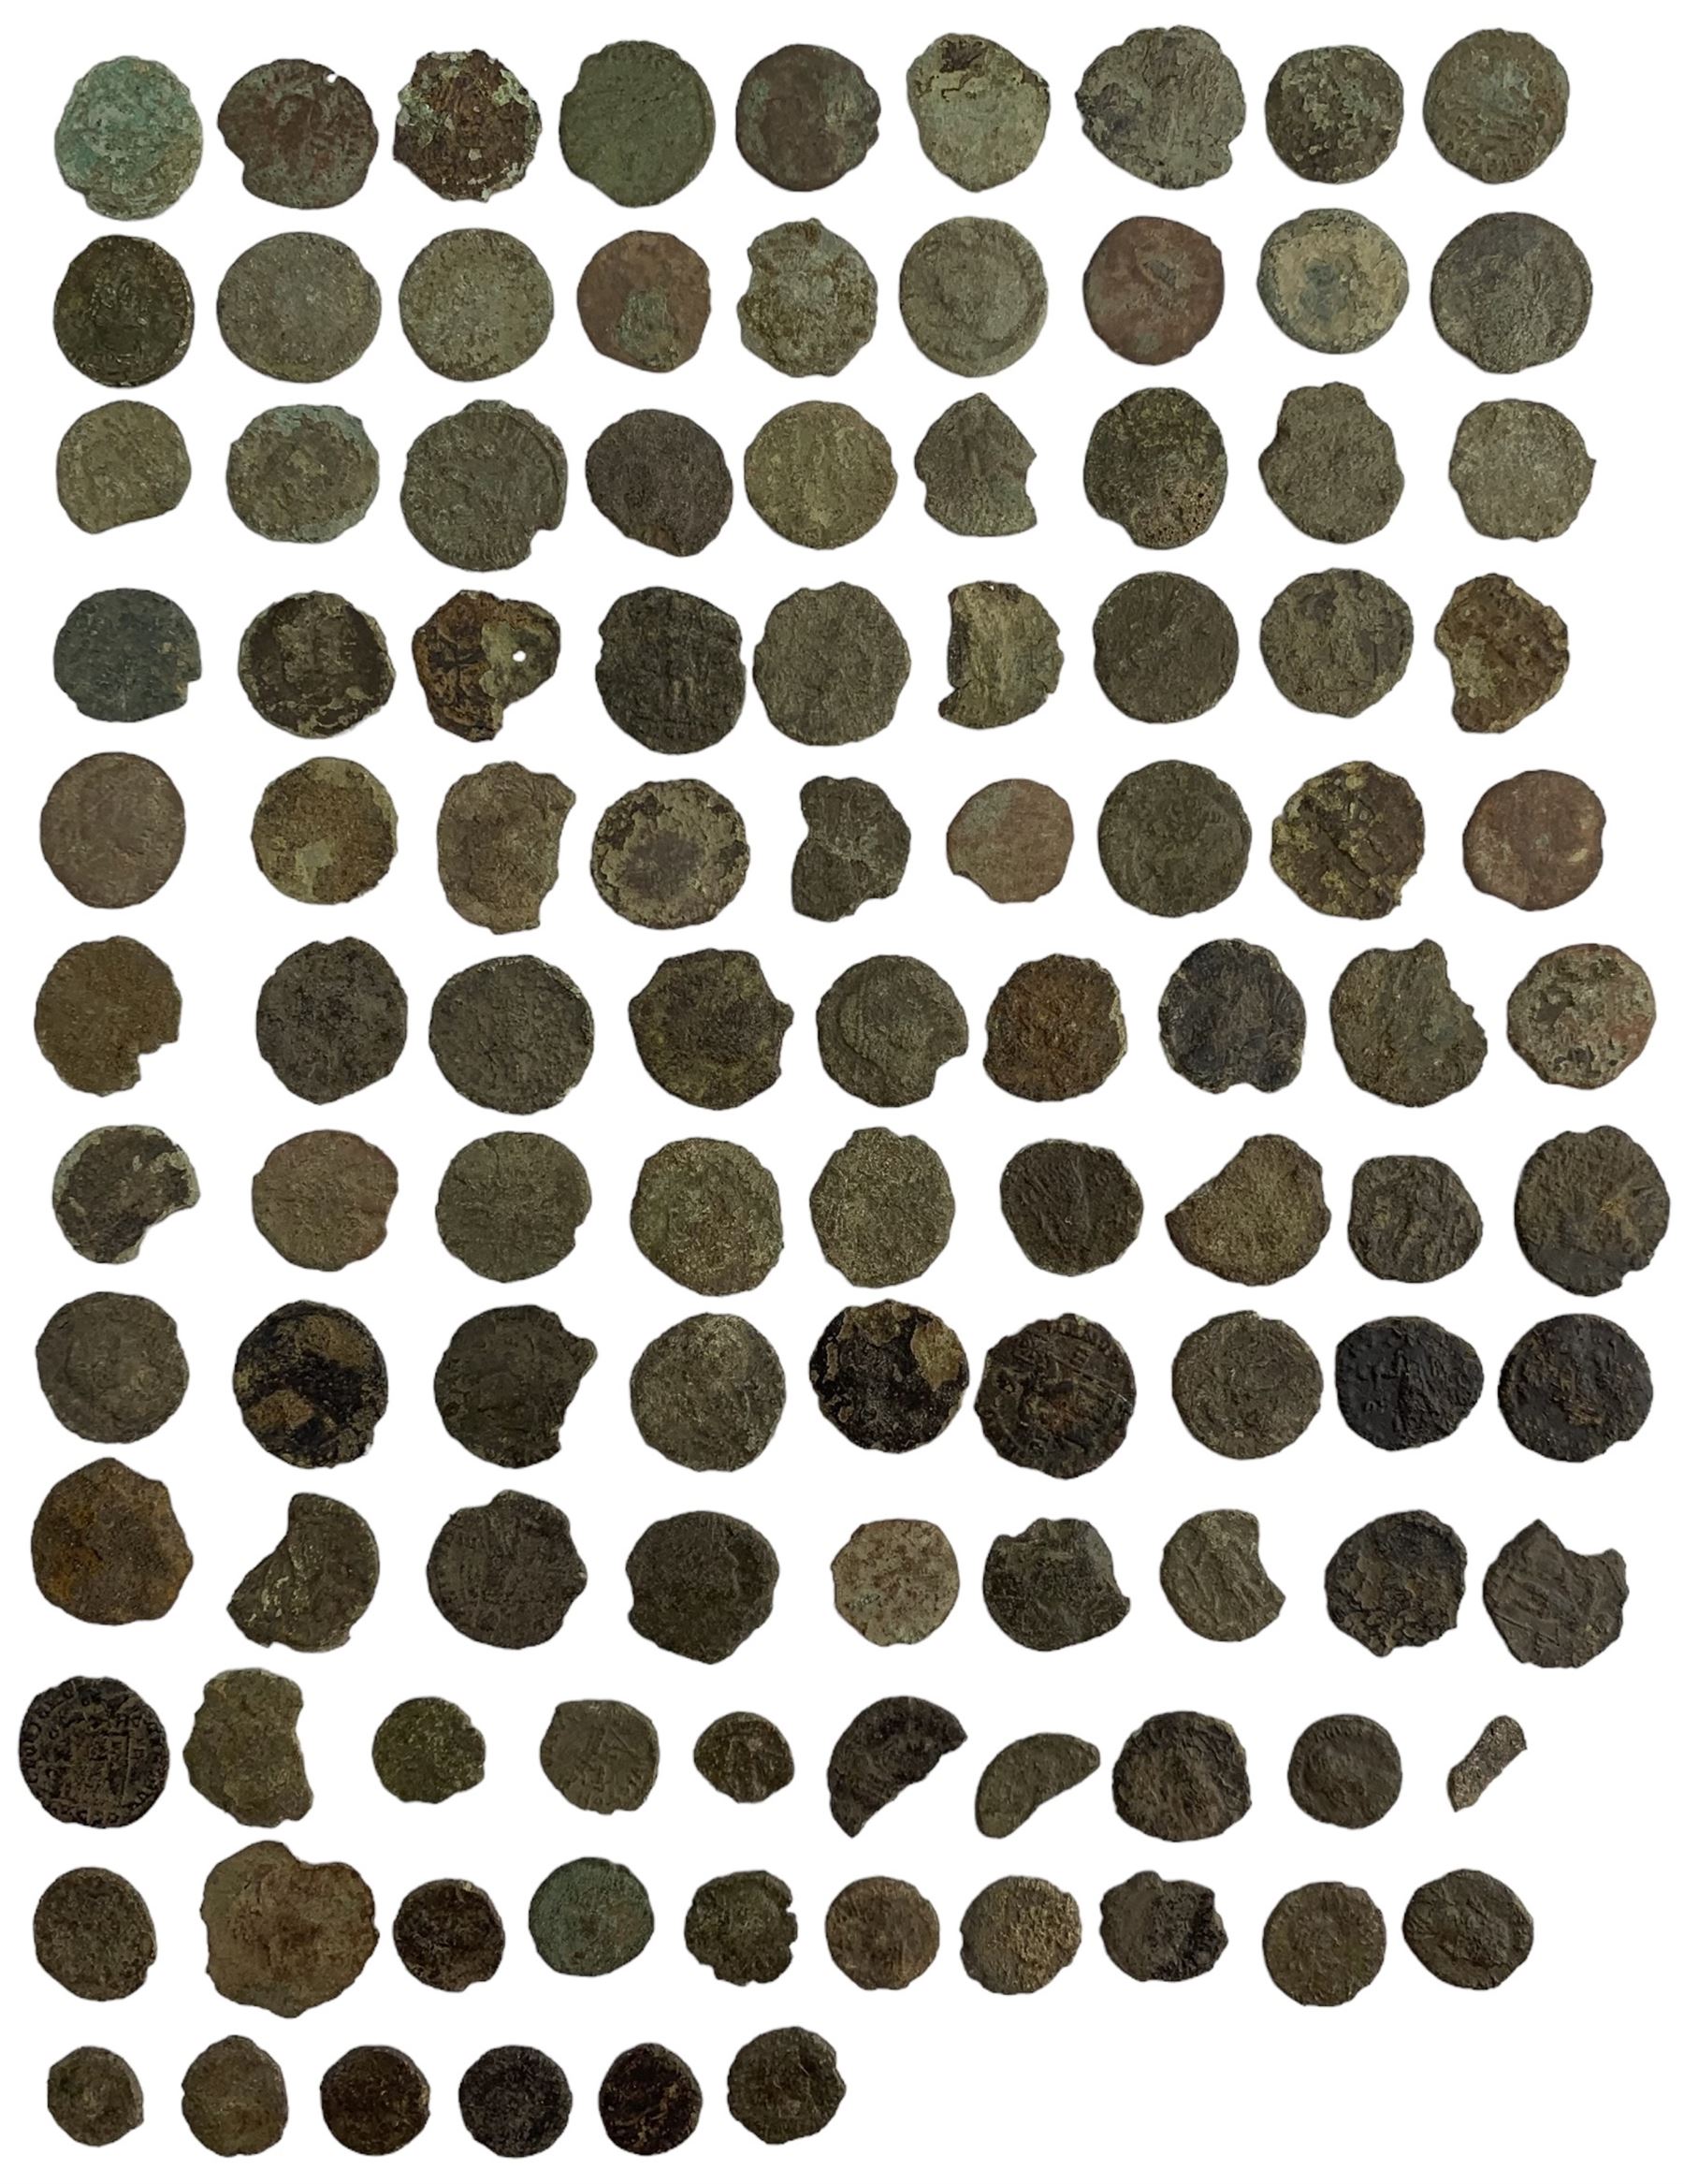 Roman coinage mainly 4th century AD to include a collection of predominantly bronze nummi from ruler